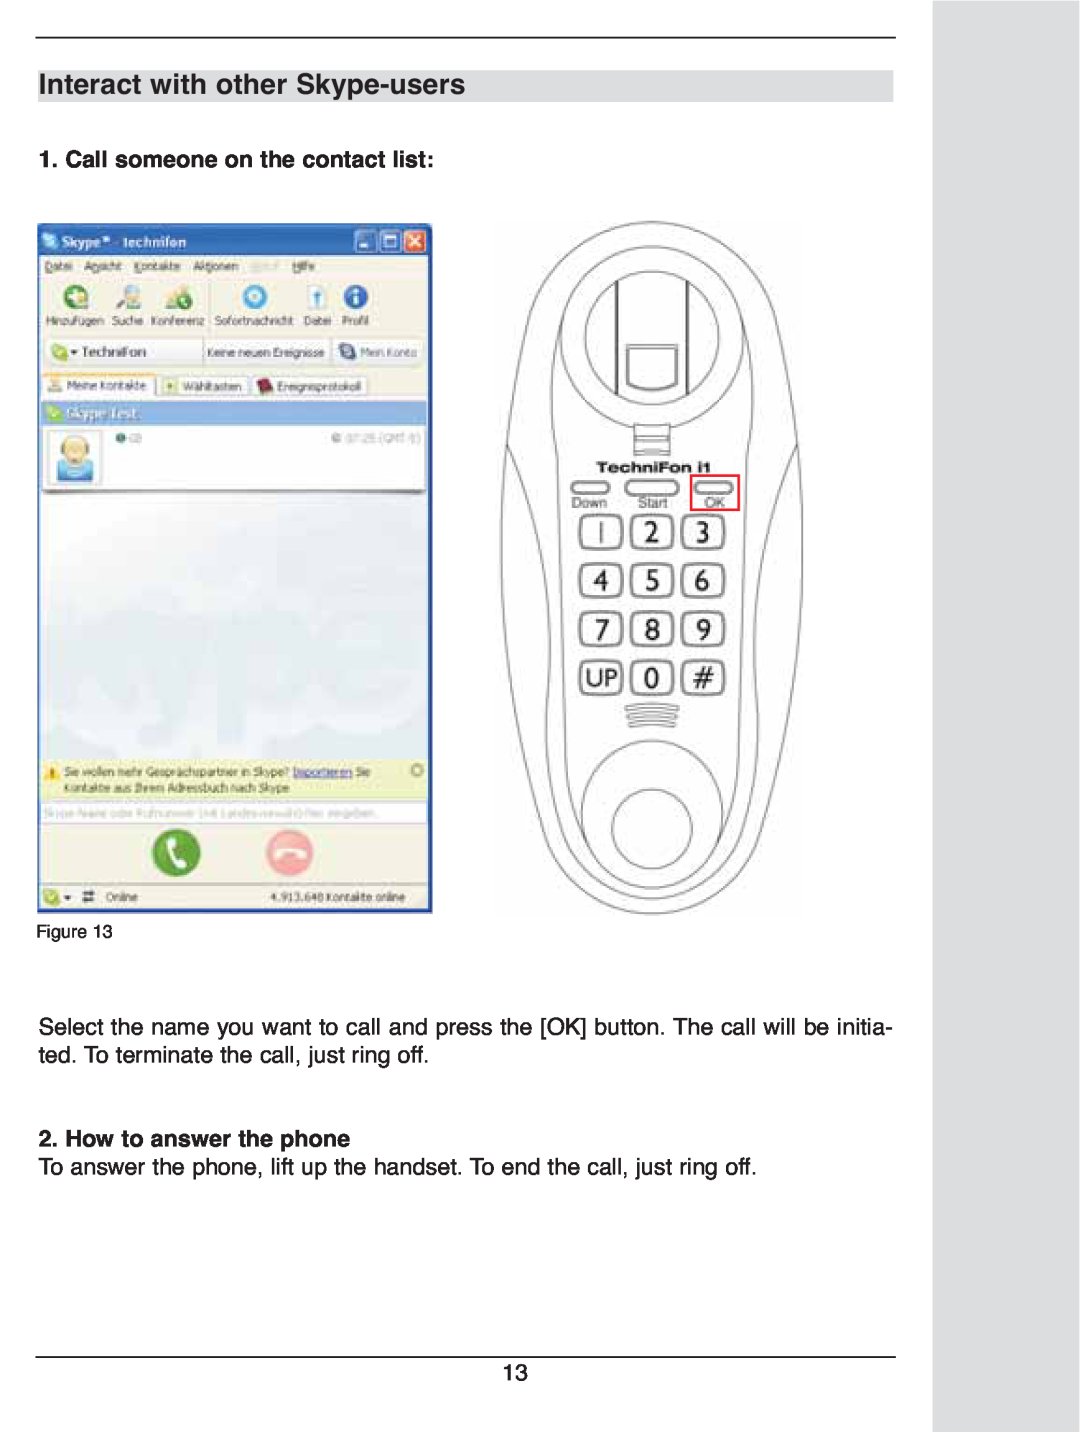 TechniSat i1 user manual Interact with other Skype-users, Call someone on the contact list, How to answer the phone 